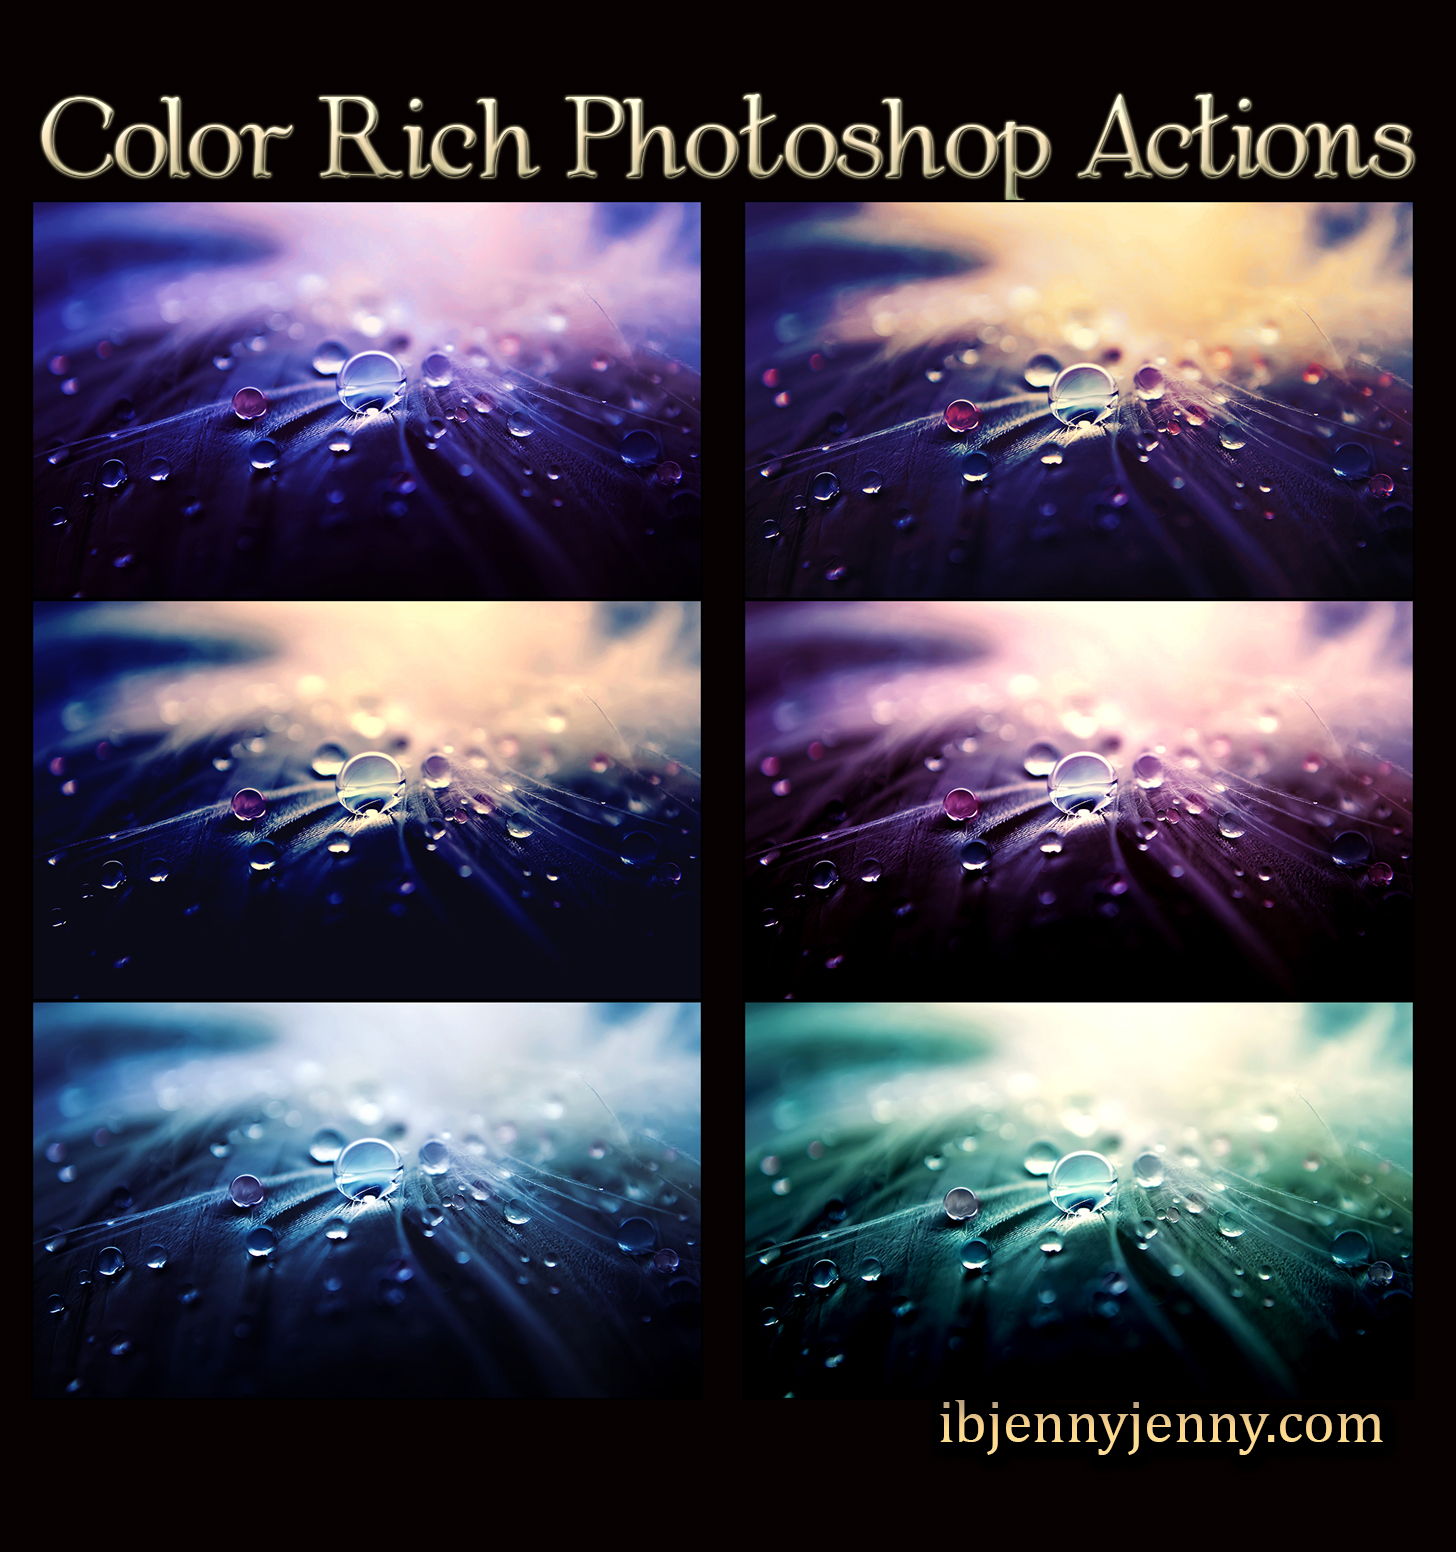 FREE COLOR RICH PHOTOSHOP ACTIONS